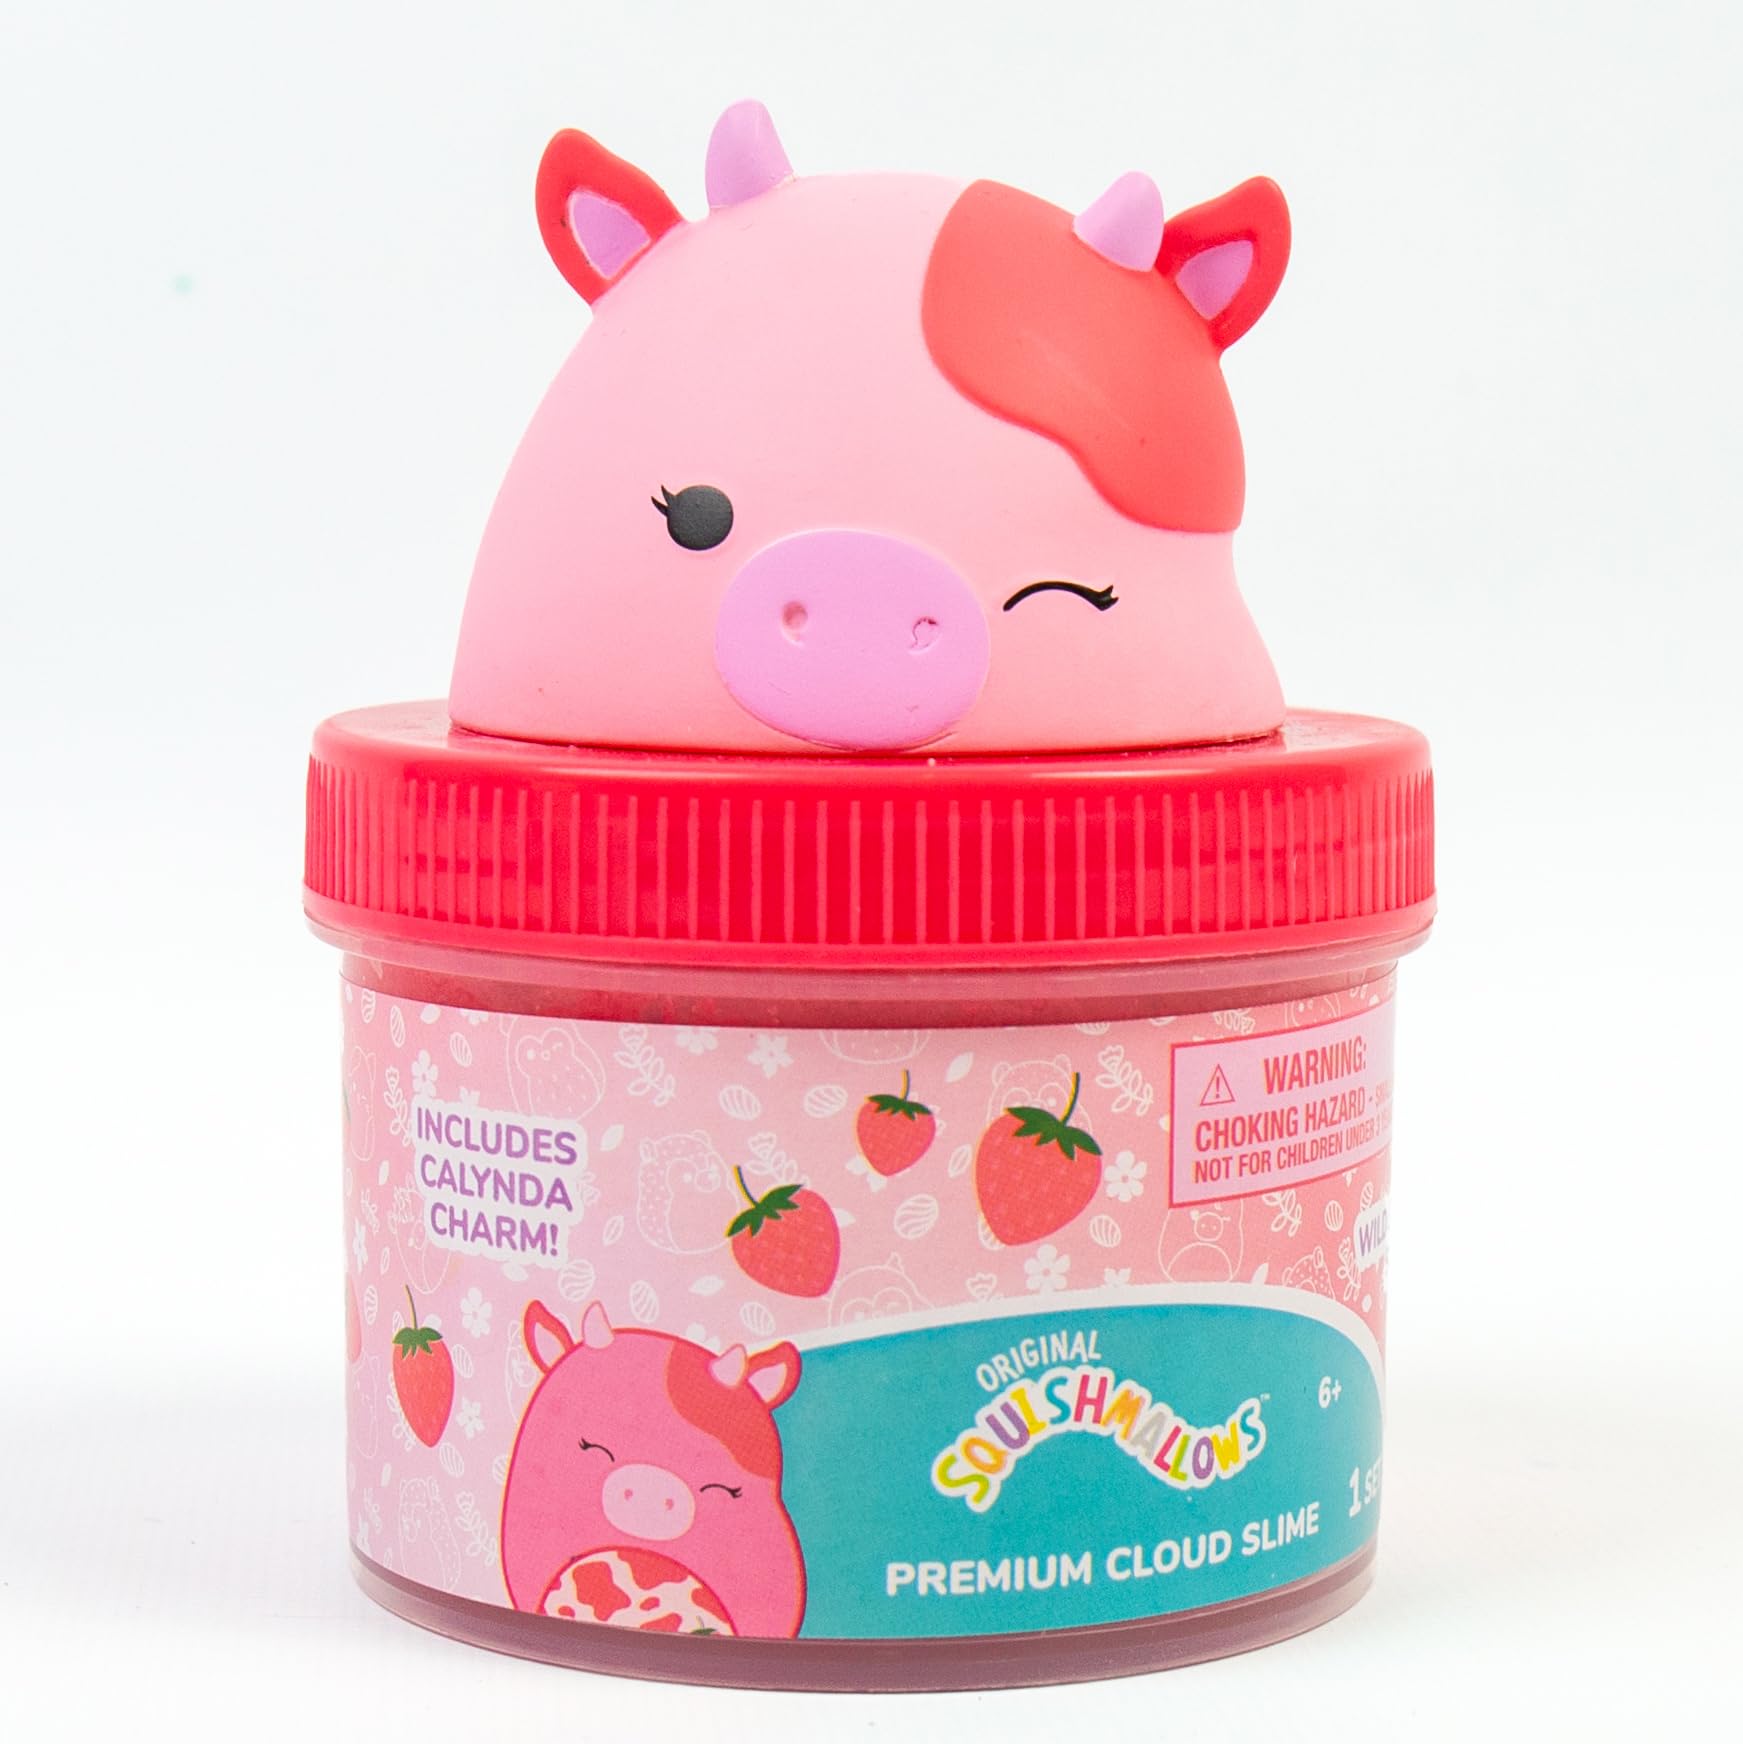 Original Squishmallows Calynda The Cow Premium Cloud Slime, 8 oz. Fluffy Slime, Strawberry Scented, 3 Fun Slime Add Ins, Pre-Made Slime for Kids, Great 6 Year Old Toys, Super Soft Sludge Toy